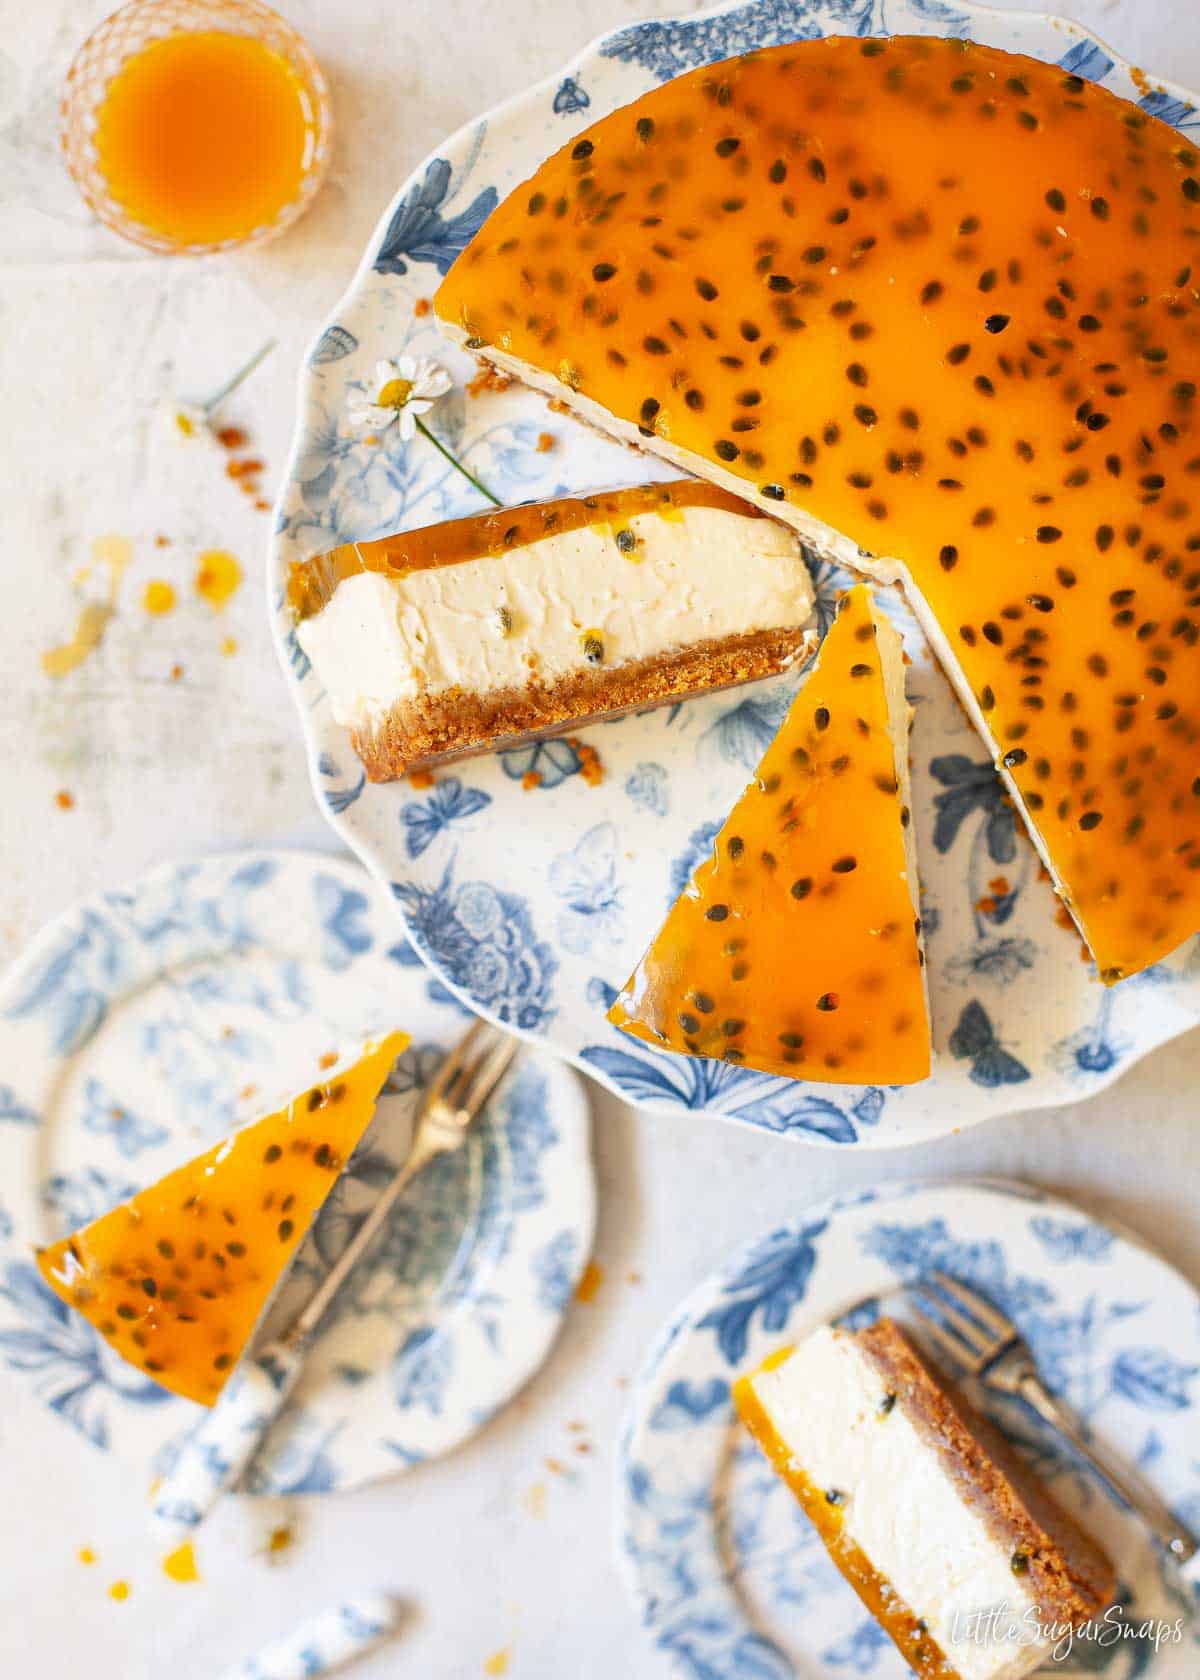 A no-bake passionfruit cheesecake being sliced and served.